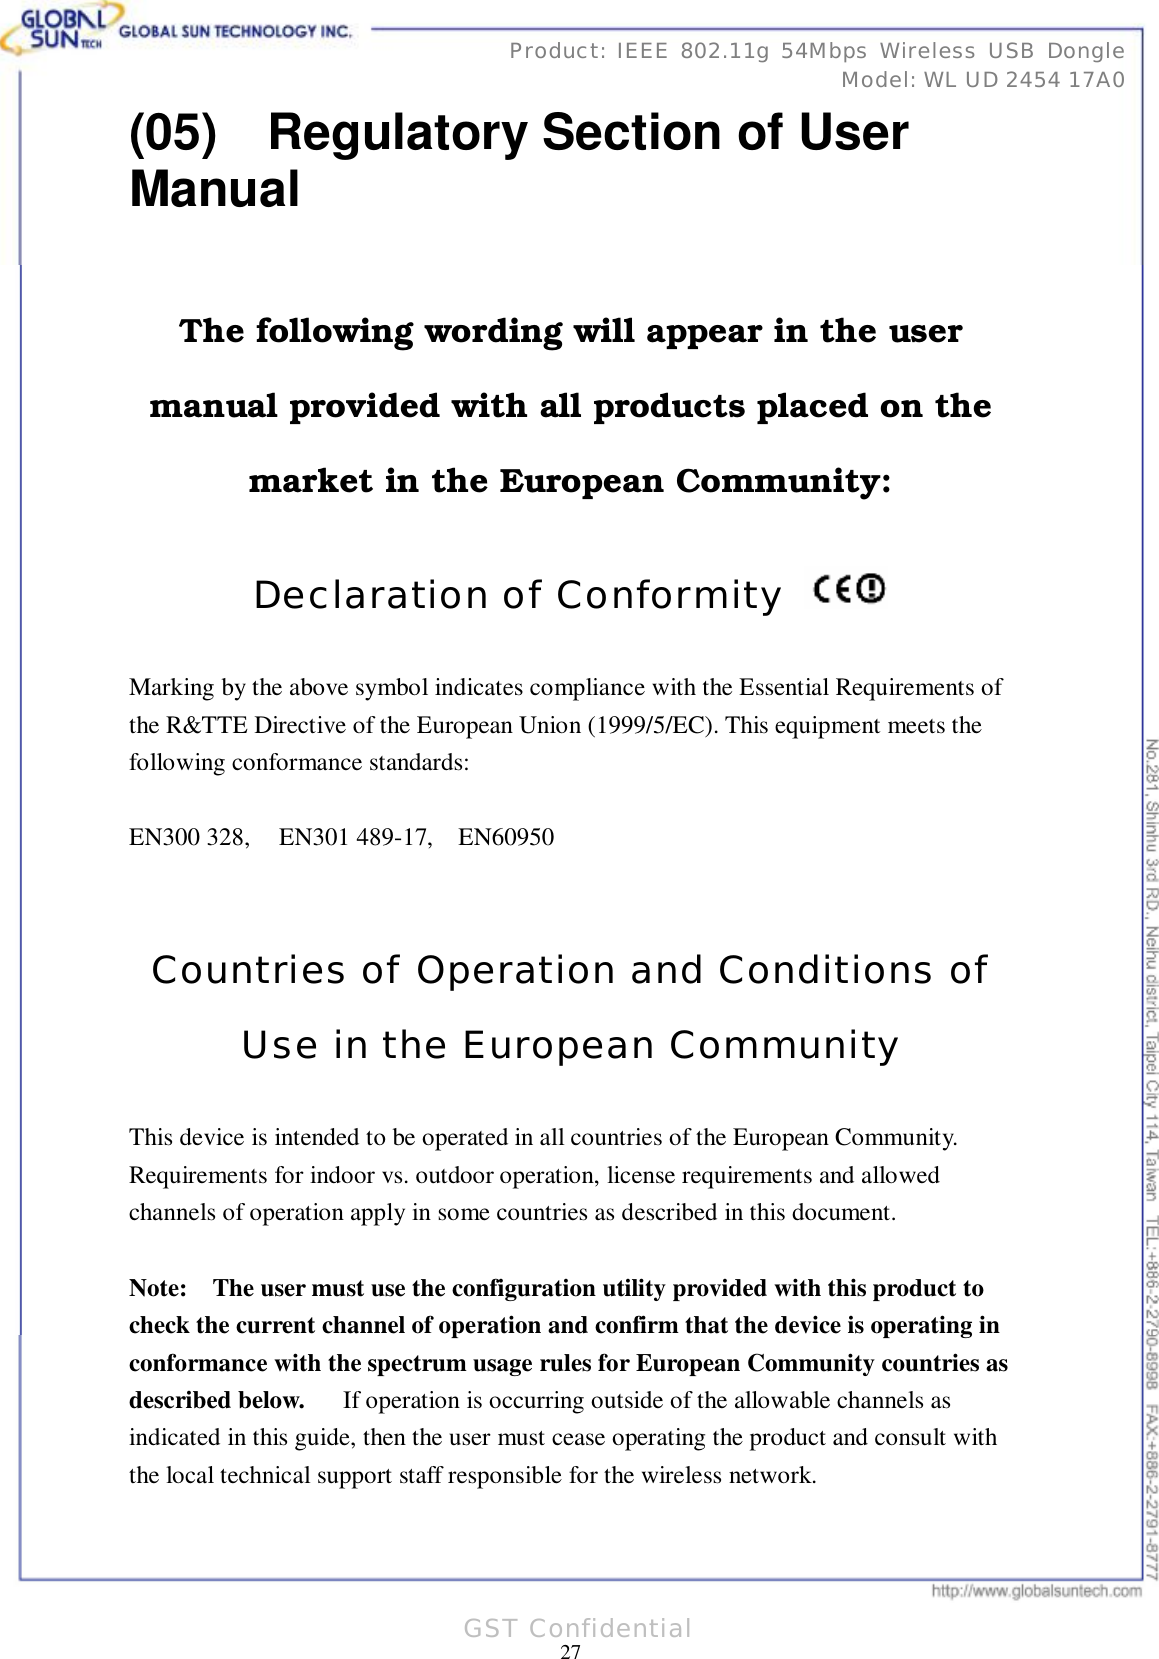      31 27Product: IEEE 802.11g 54Mbps Wireless USB Dongle Model: WL UD 2454 17A0 GST Confidential (05)  Regulatory Section of User Manual  The following wording will appear in the user manual provided with all products placed on the market in the European Community:  Declaration of Conformity   Marking by the above symbol indicates compliance with the Essential Requirements of the R&amp;TTE Directive of the European Union (1999/5/EC). This equipment meets the following conformance standards:  EN300 328,  EN301 489-17,  EN60950   Countries of Operation and Conditions of Use in the European Community  This device is intended to be operated in all countries of the European Community.  Requirements for indoor vs. outdoor operation, license requirements and allowed channels of operation apply in some countries as described in this document.  Note:  The user must use the configuration utility provided with this product to check the current channel of operation and confirm that the device is operating in conformance with the spectrum usage rules for European Community countries as described below.   If operation is occurring outside of the allowable channels as indicated in this guide, then the user must cease operating the product and consult with the local technical support staff responsible for the wireless network.  